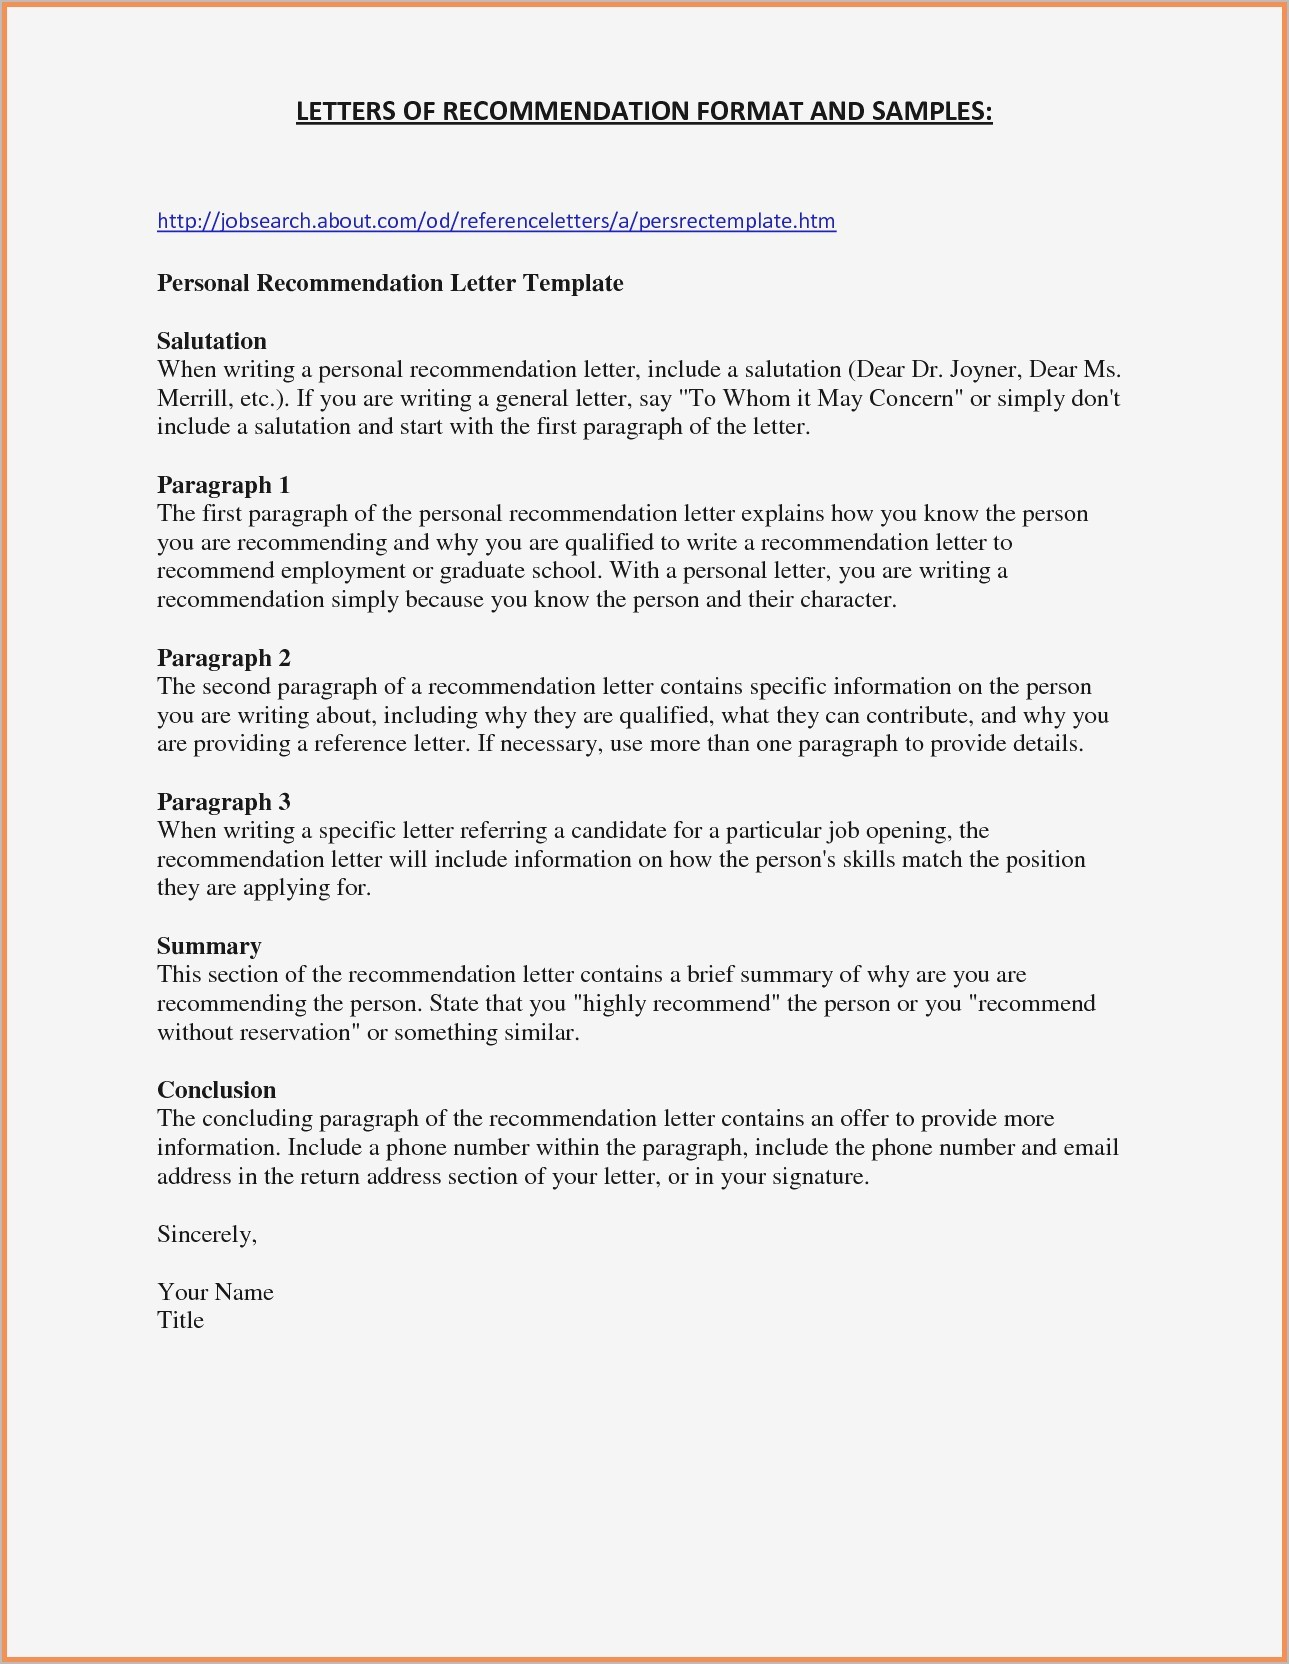 How to Write A Letter Of Recommendation Template - Job Letter Re Mendation Template Best Free Letter Re Mendation